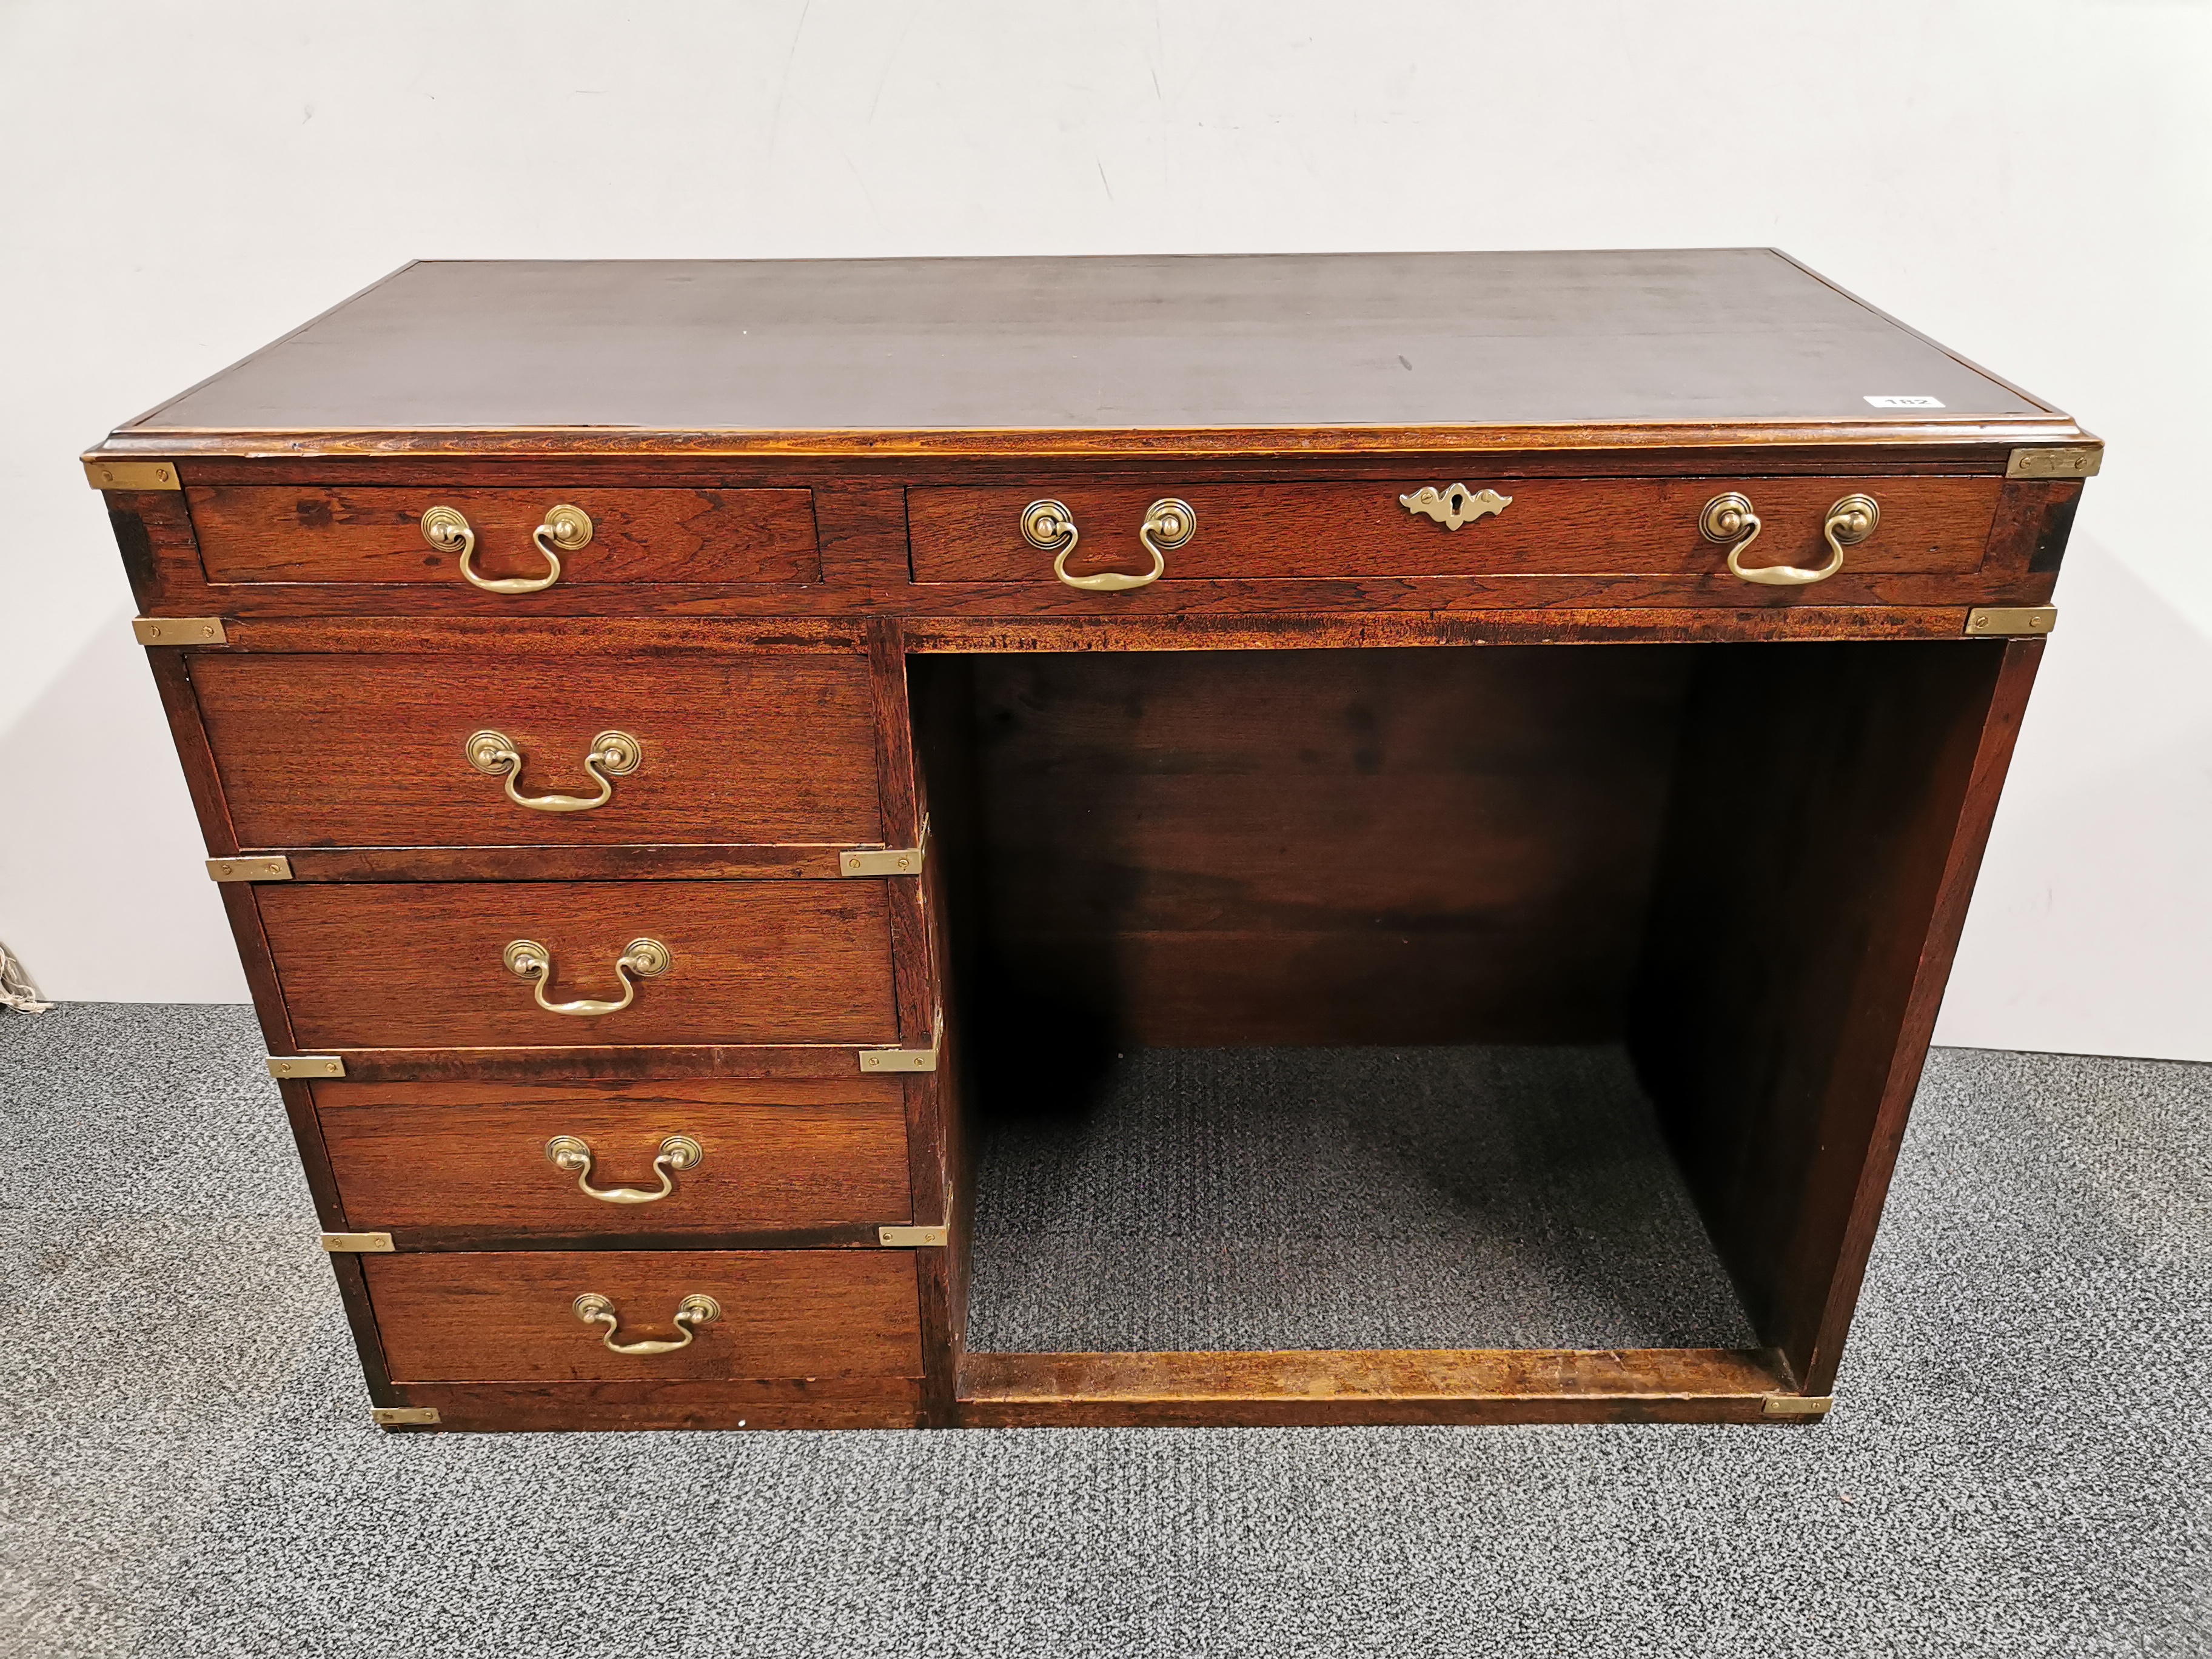 A military style brass mounted desk, 109 x 50 x 77cm.